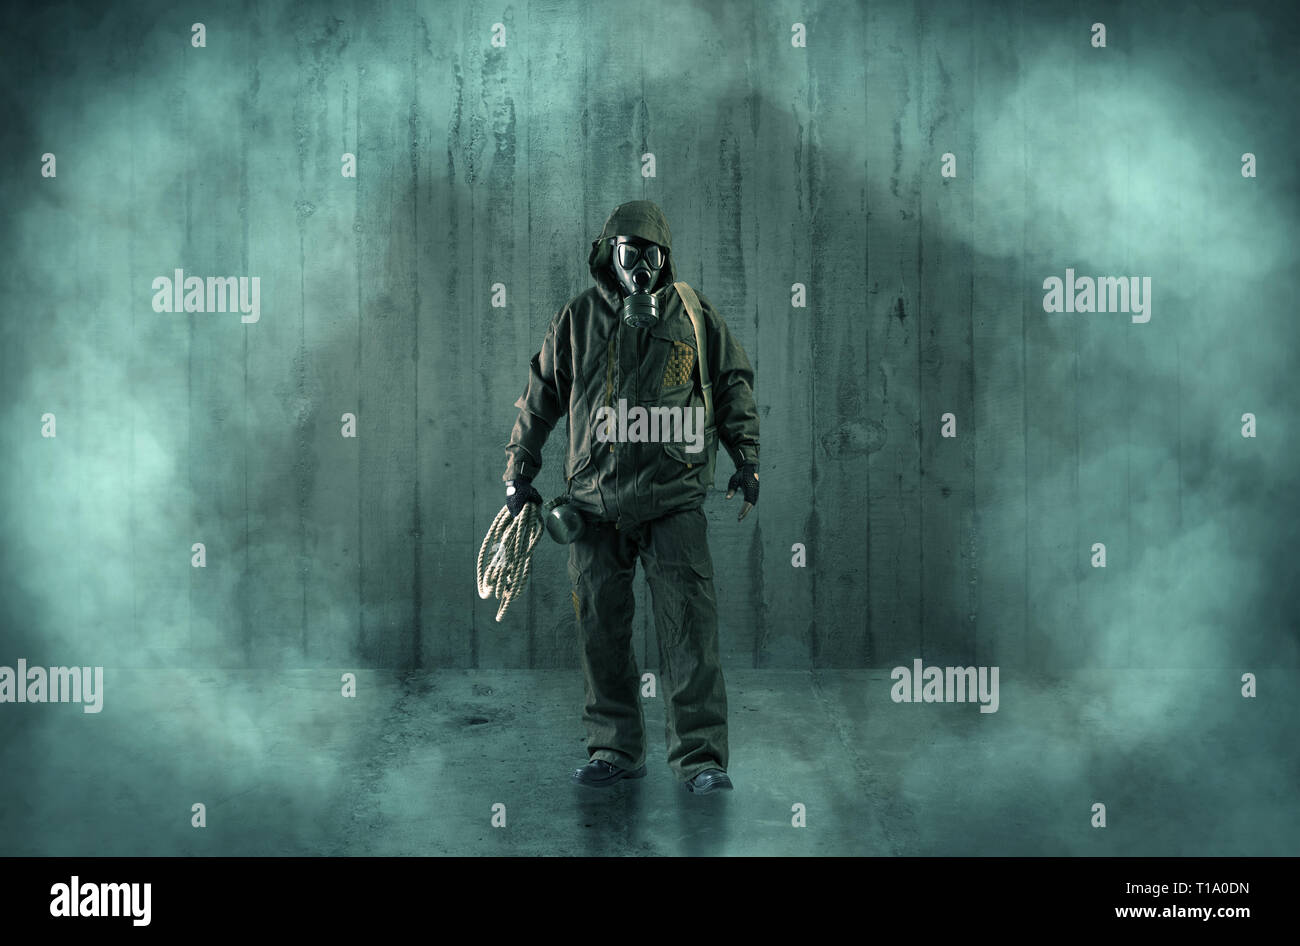 Dreadful Dangerous Man With Wood Shanty Wallpaper And Fume Around Stock Photo Alamy